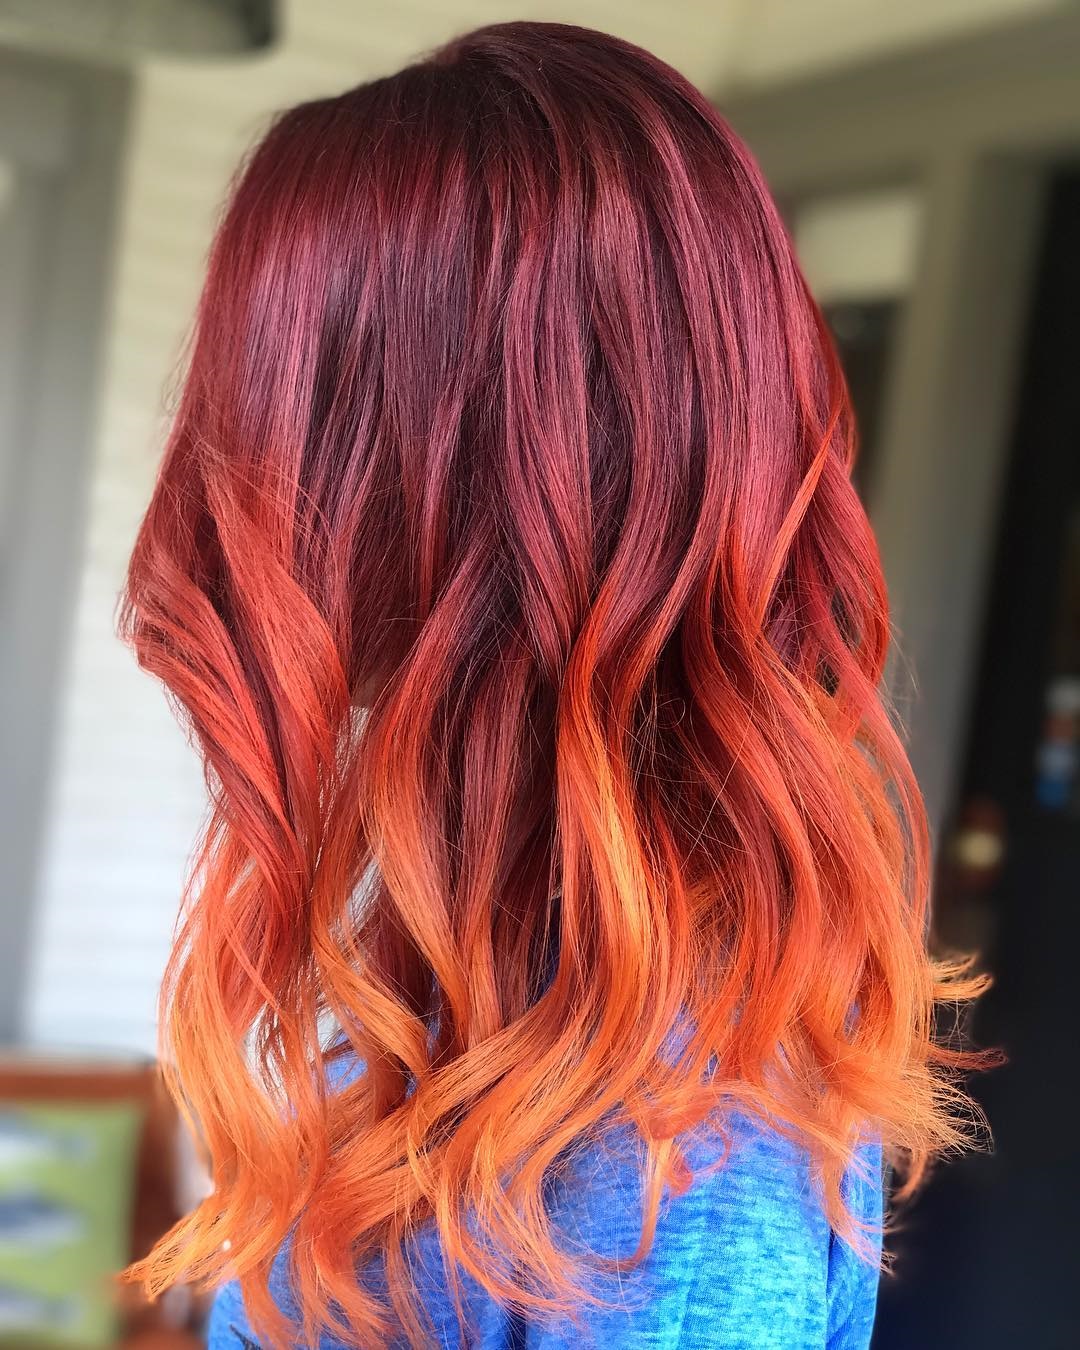 20-Radical-Styling-Ideas-For-Your-Red-Ombre-Hair - Medfield Public Library